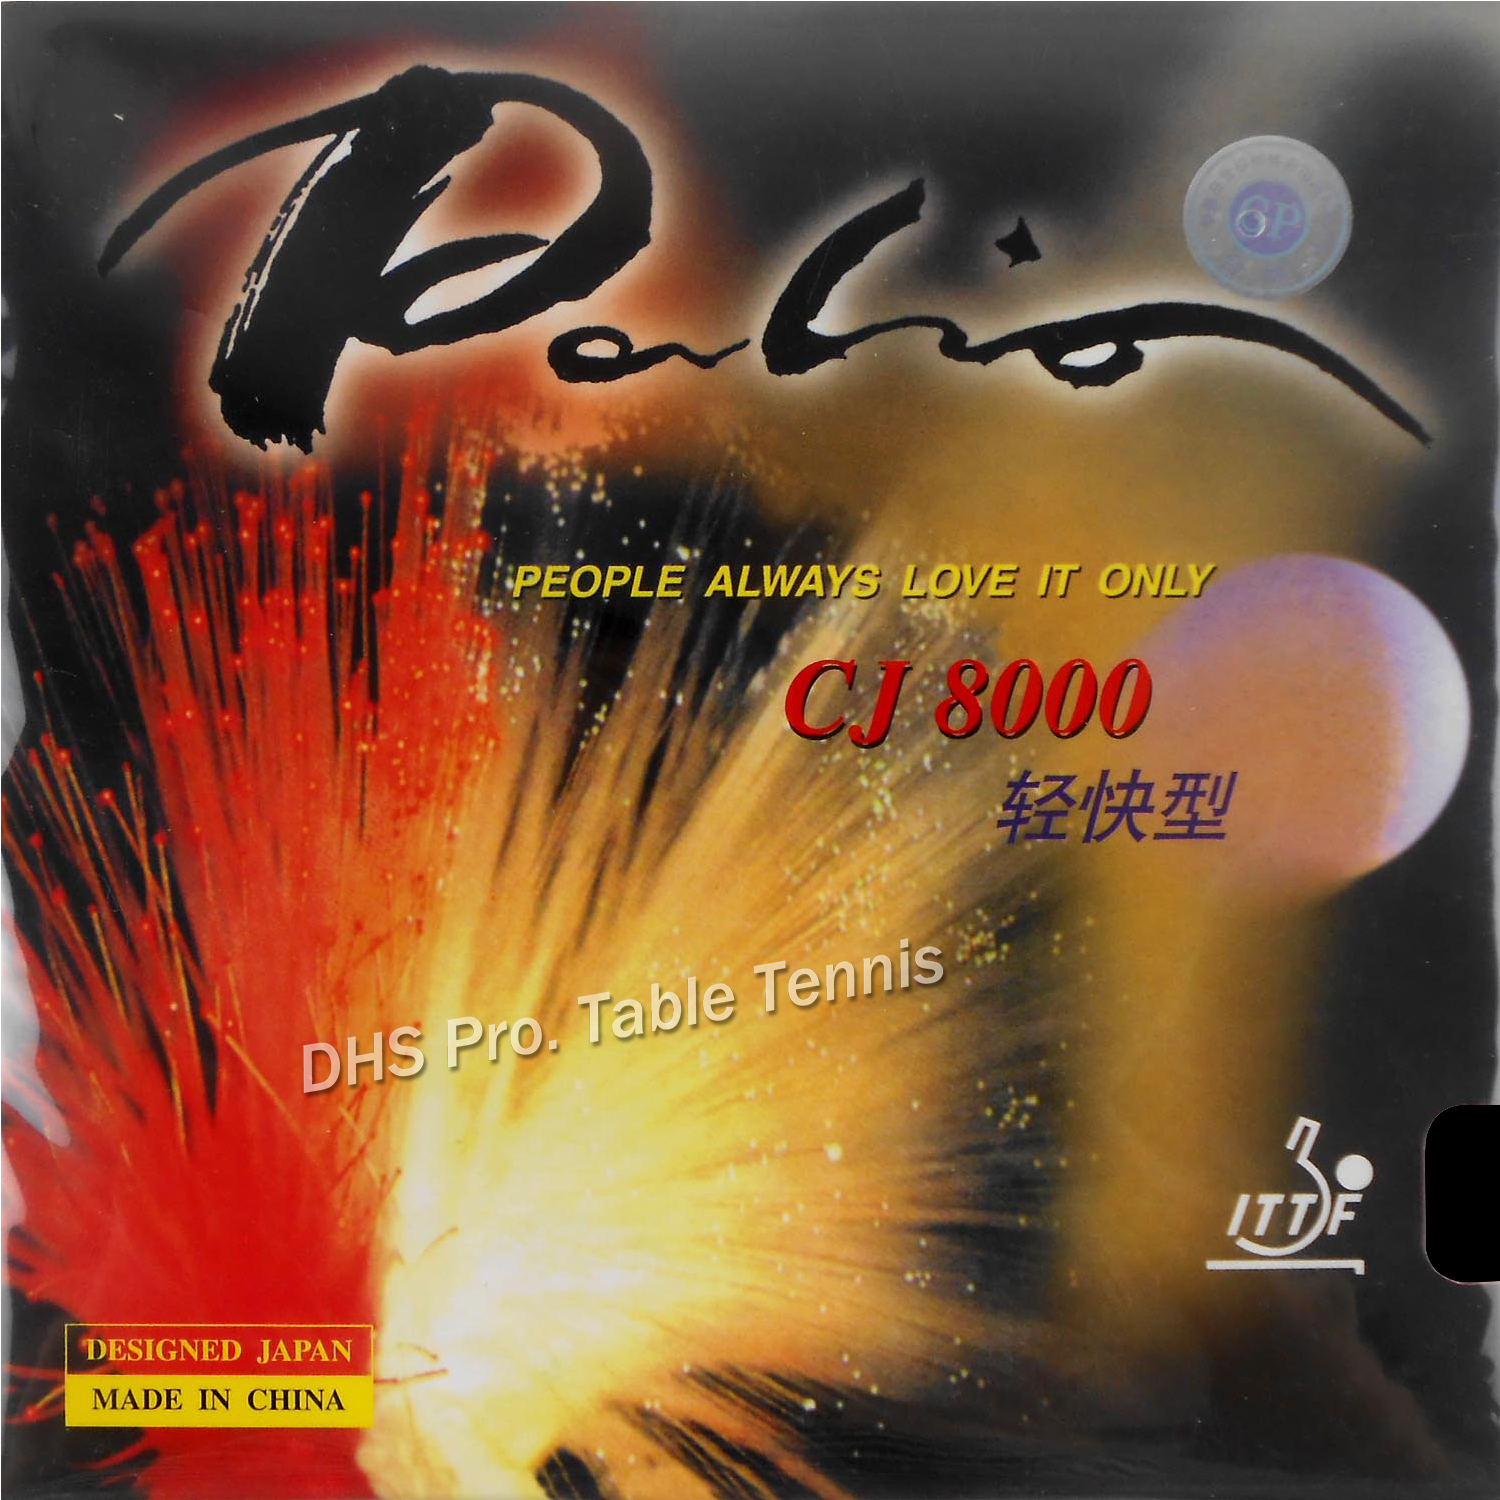 Palio CJ8000 Light&Fast Type pips-in table tennis pingpong rubber with sponge